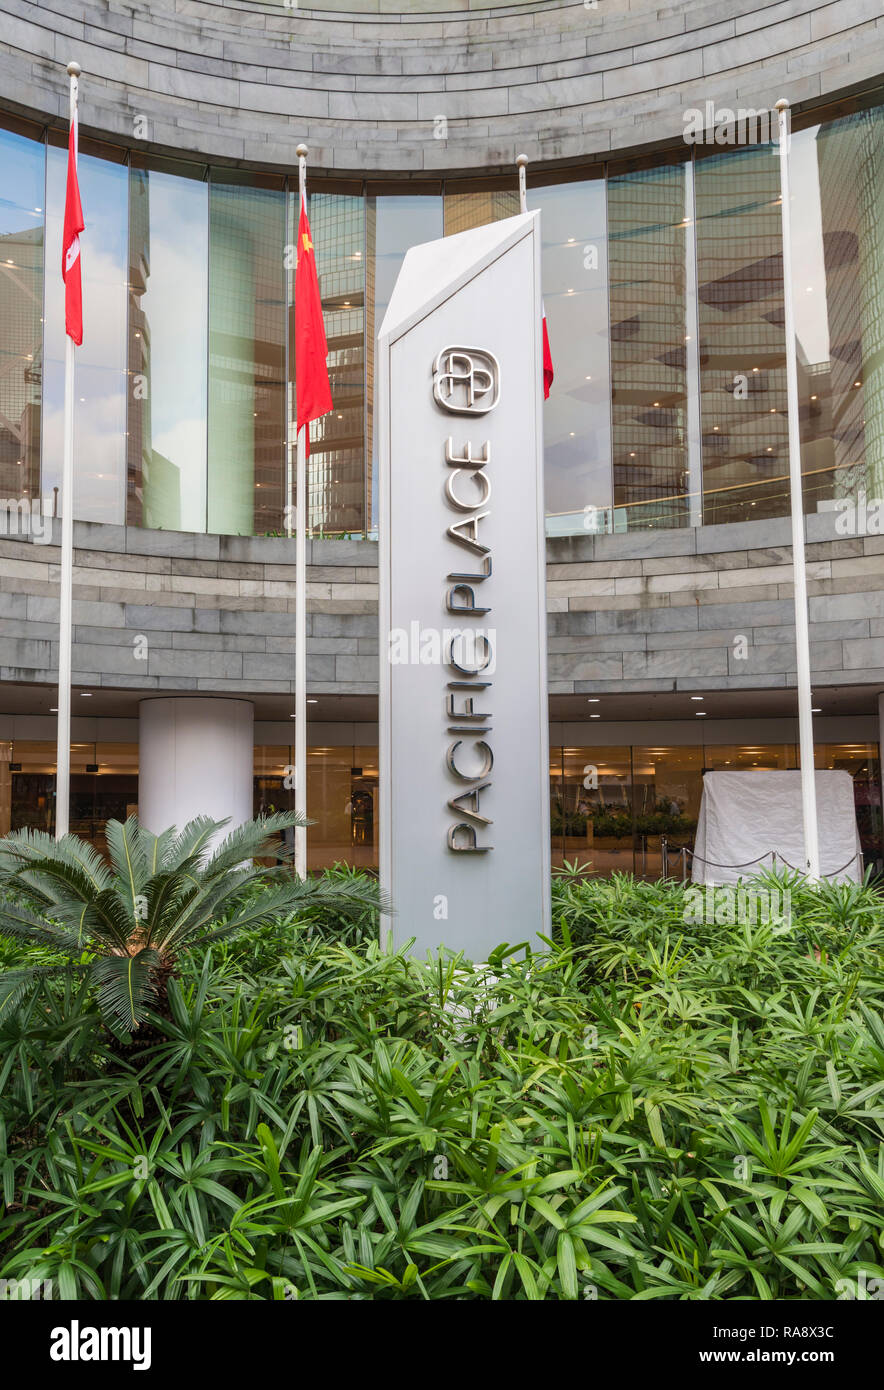 Segno e ingresso al Pacific Place Shopping Mall, Admiralty, Hong Kong Foto Stock